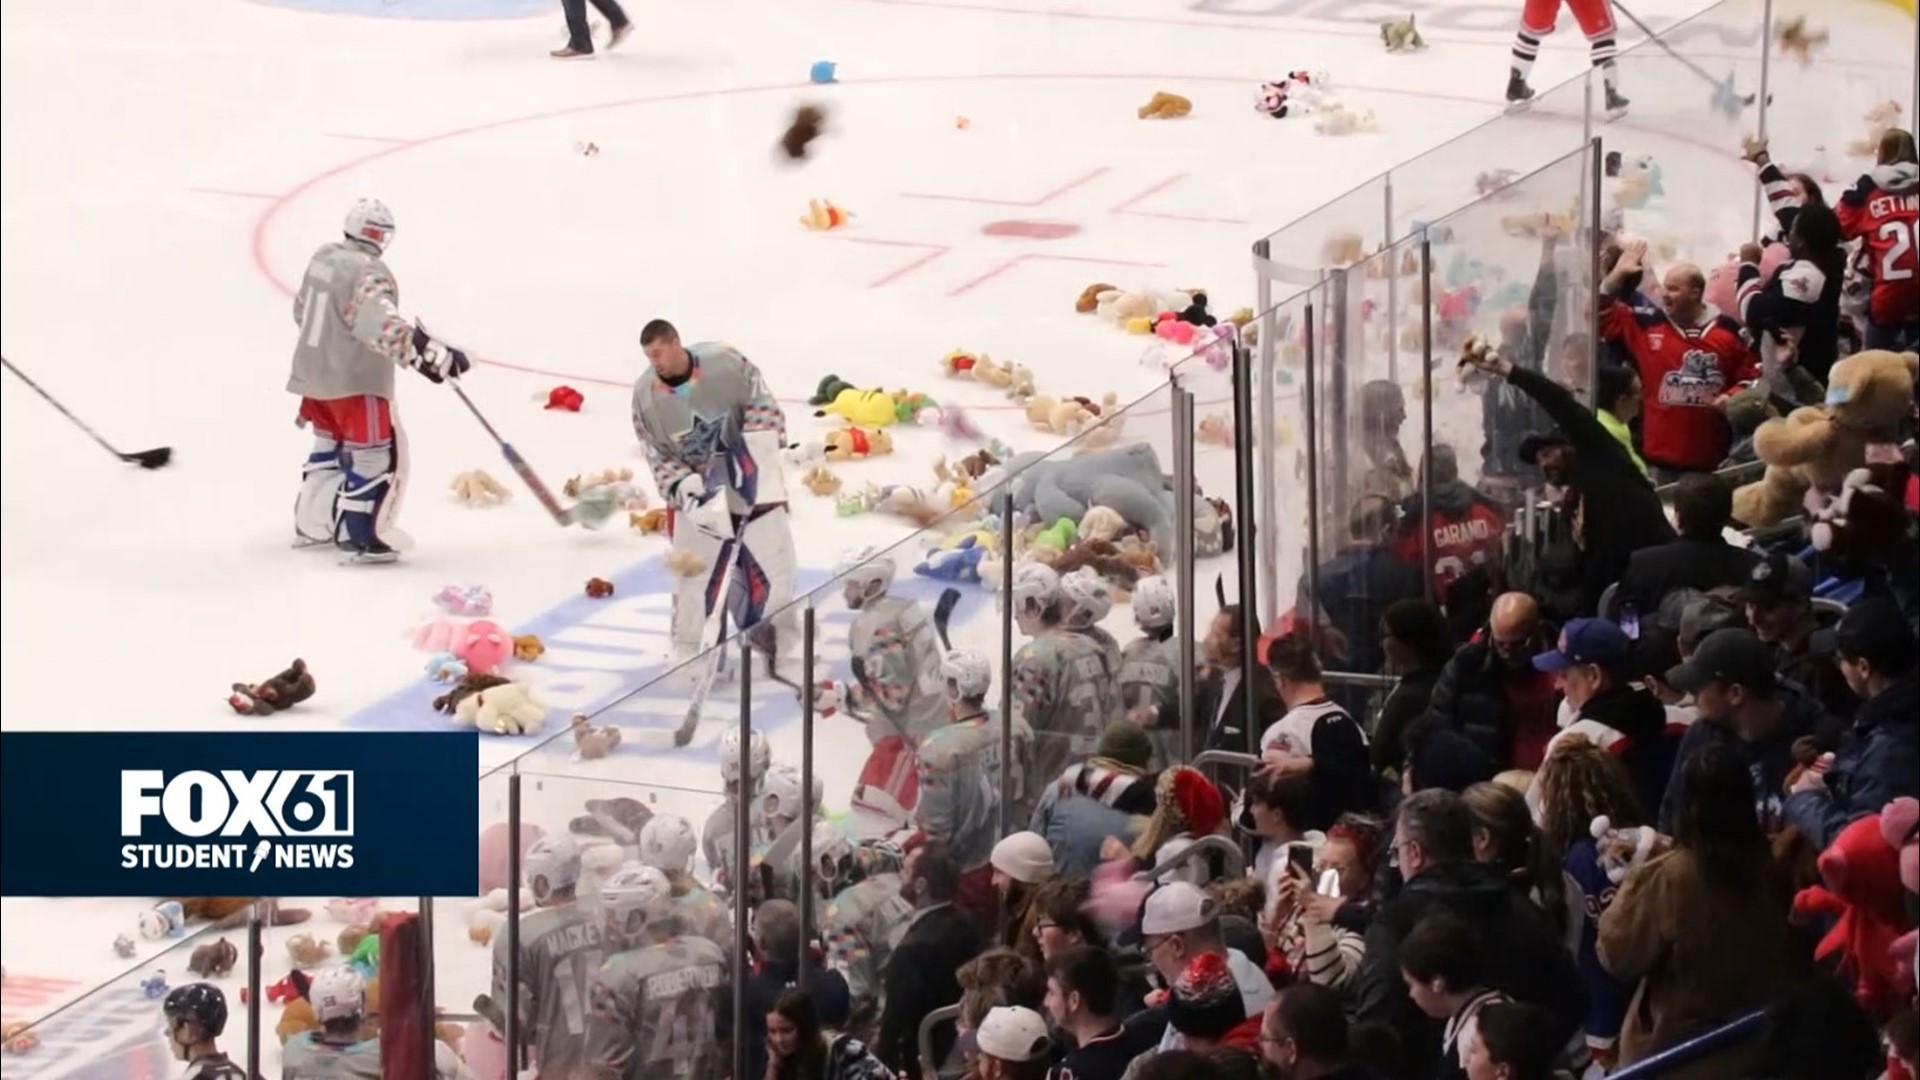 Fans were encouraged to throw teddy bears onto the ice after the first goal made by the Wolfpack which would then be donated.